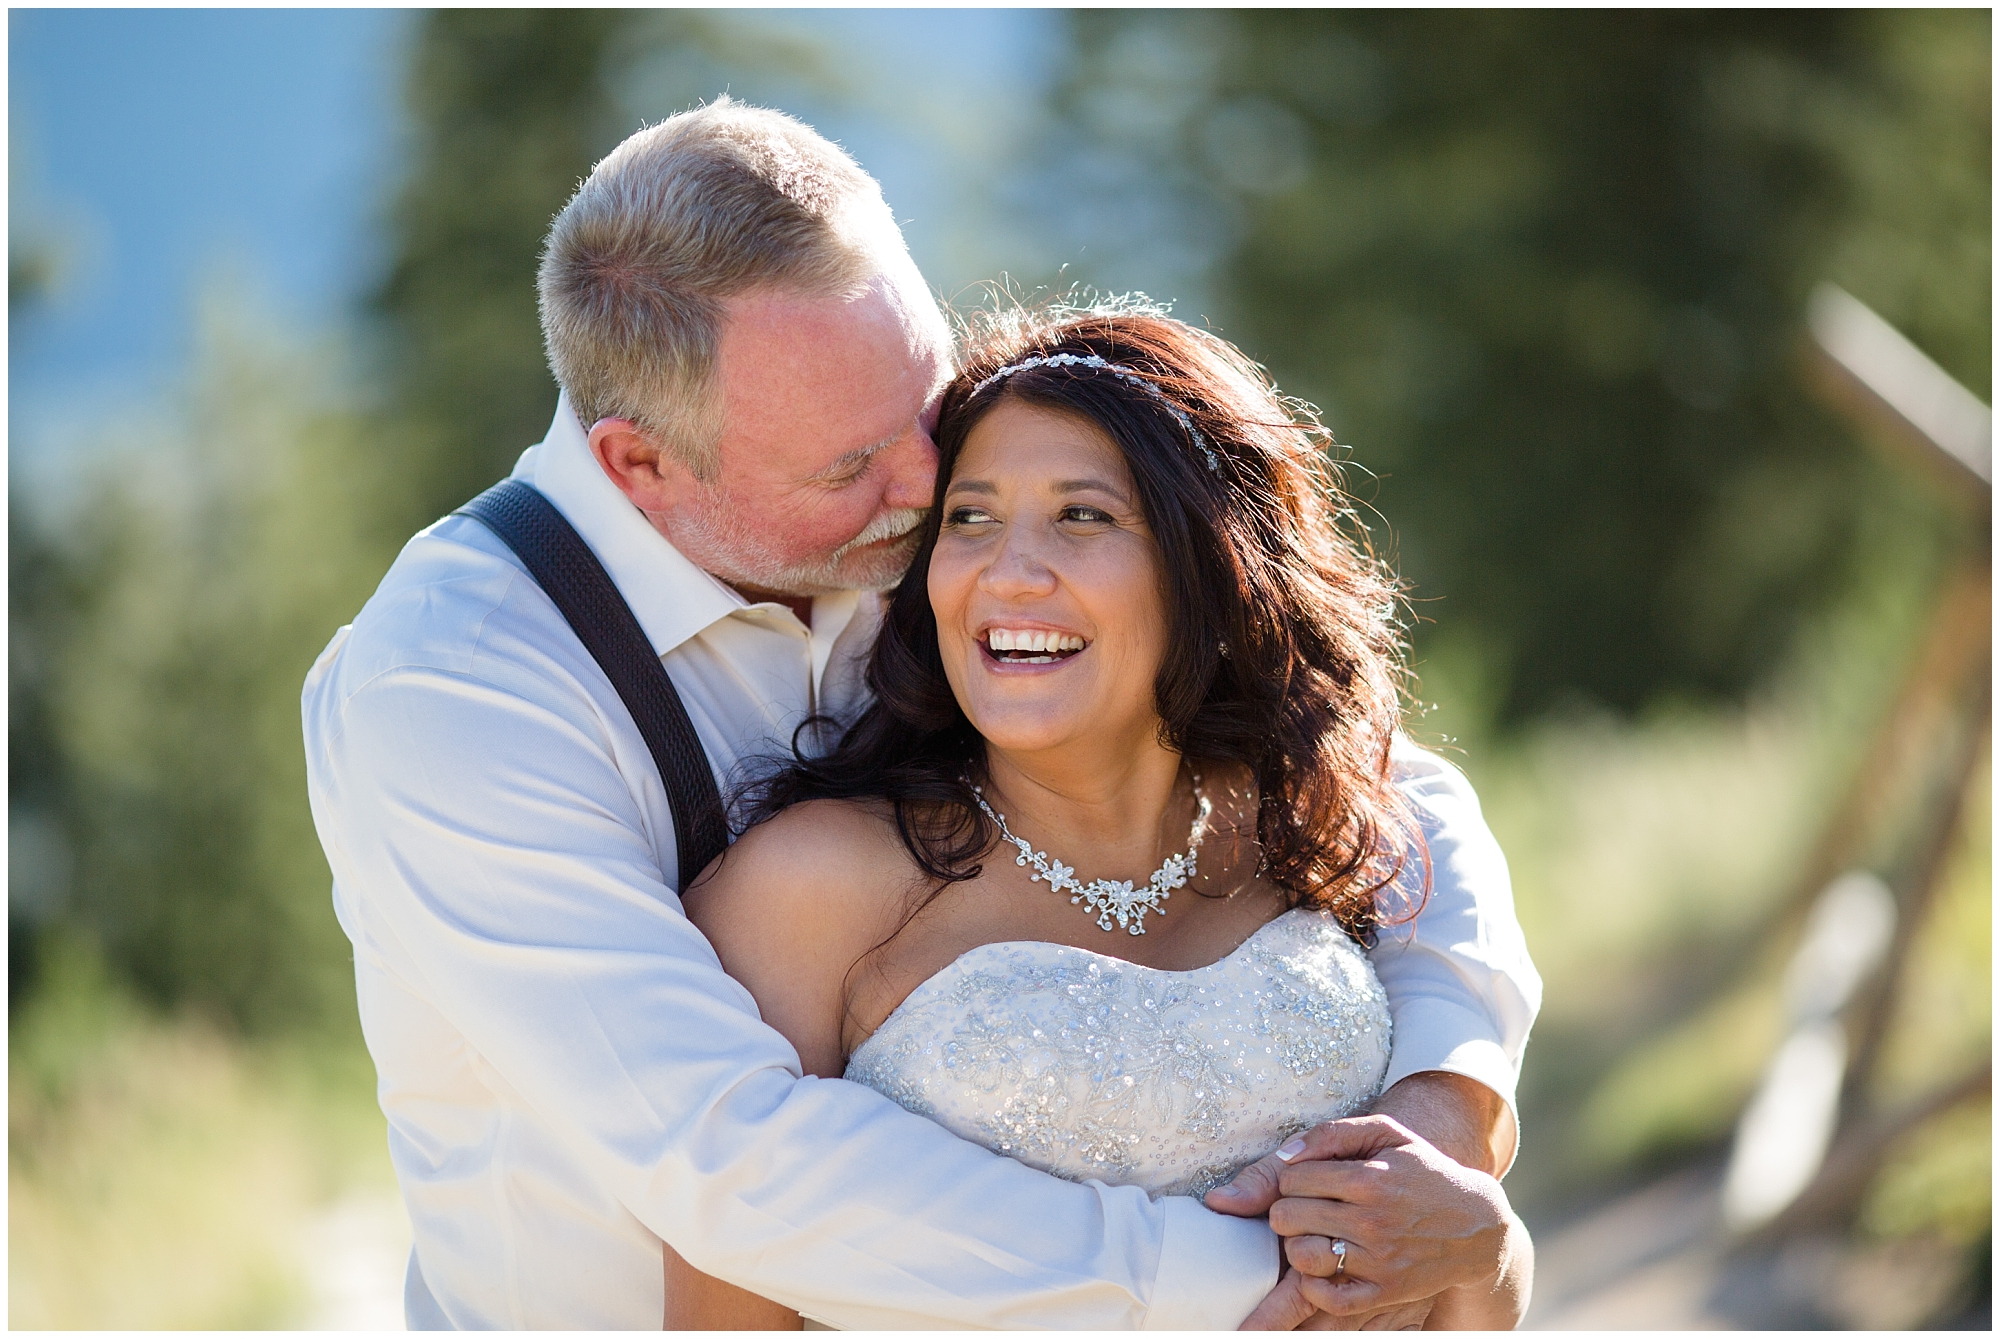 Bride laughs while her groom hugs her at their Breckenridge wedding.